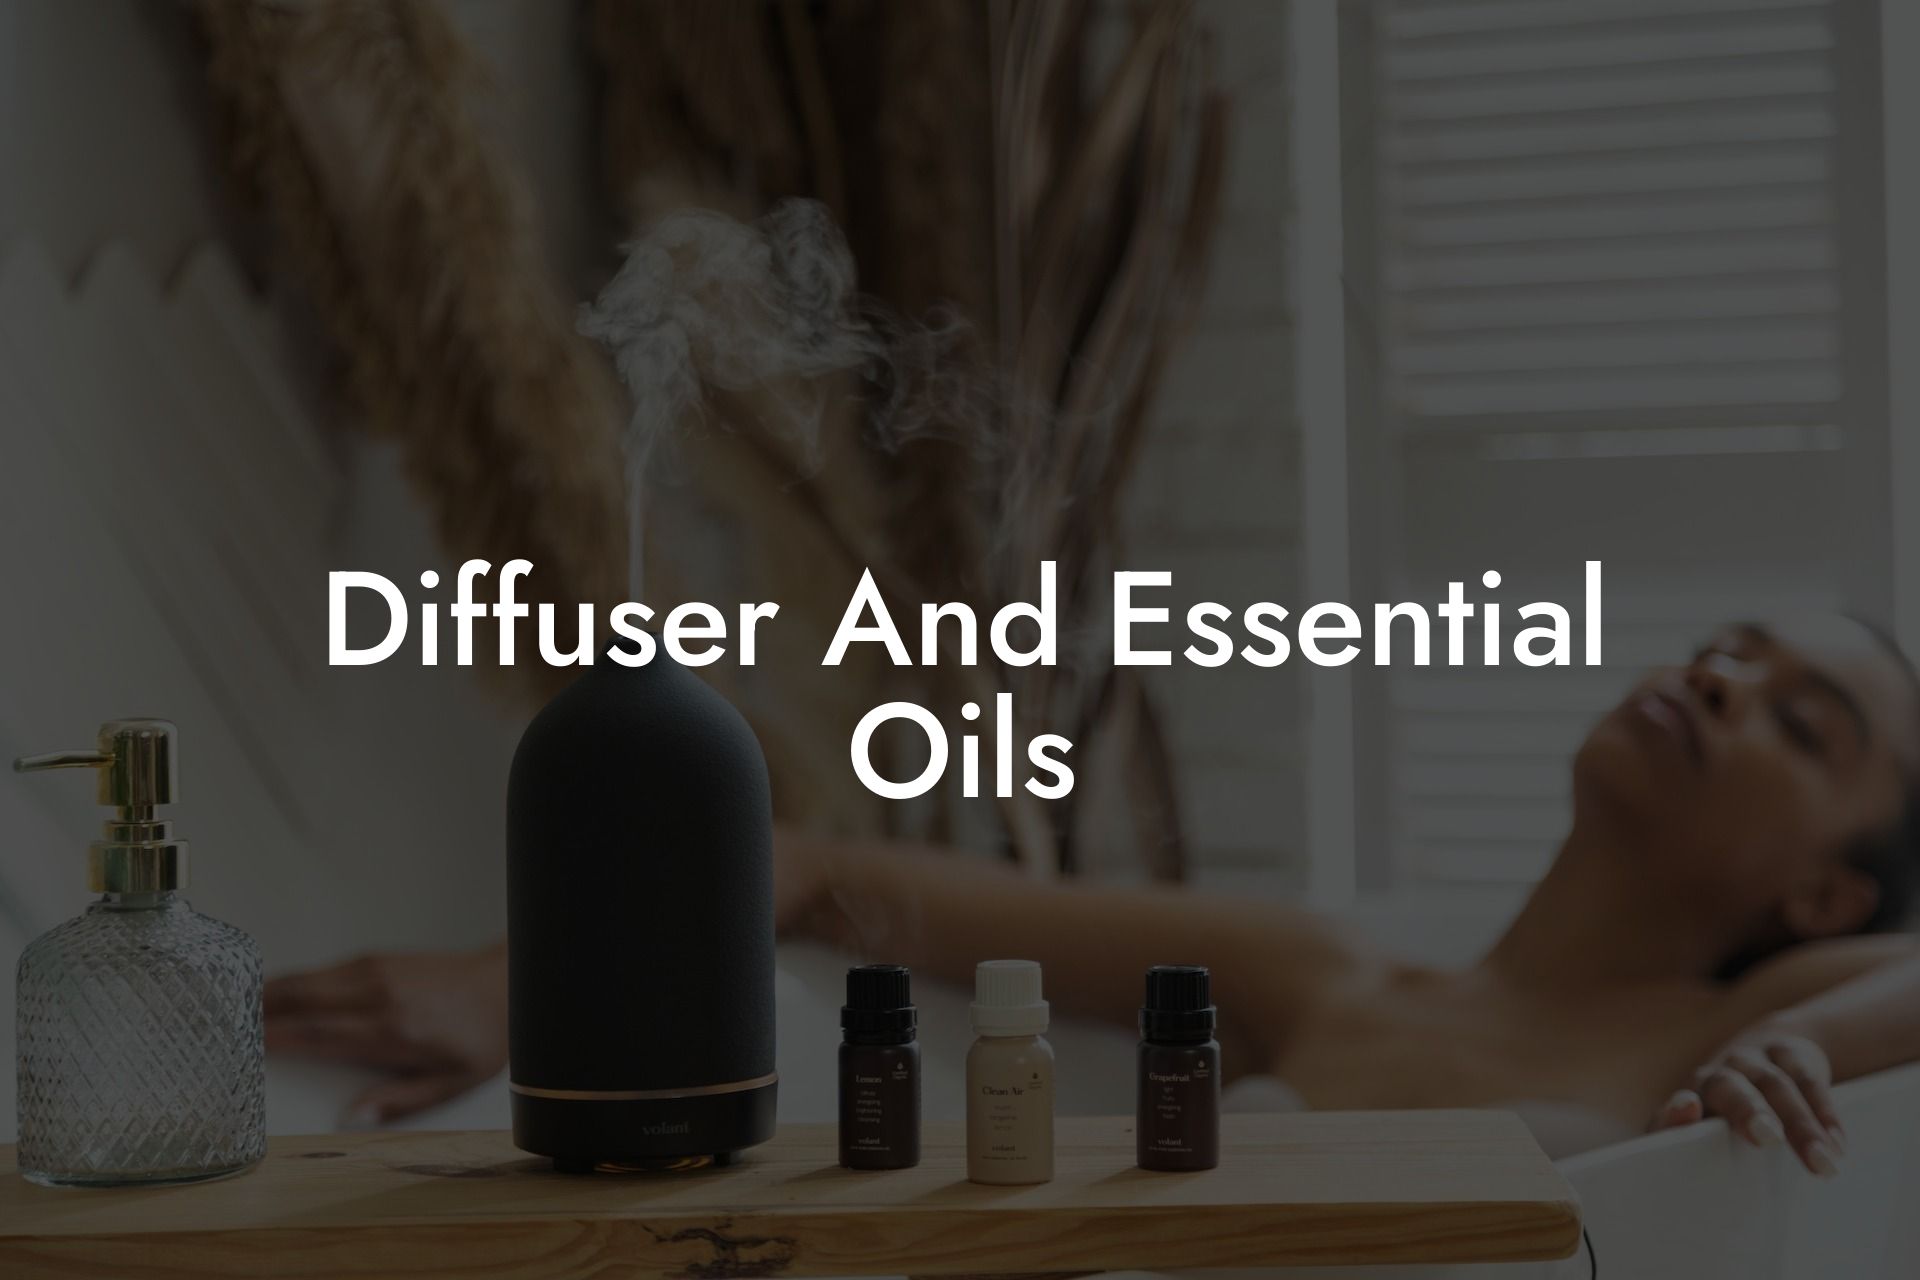 Diffuser And Essential Oils